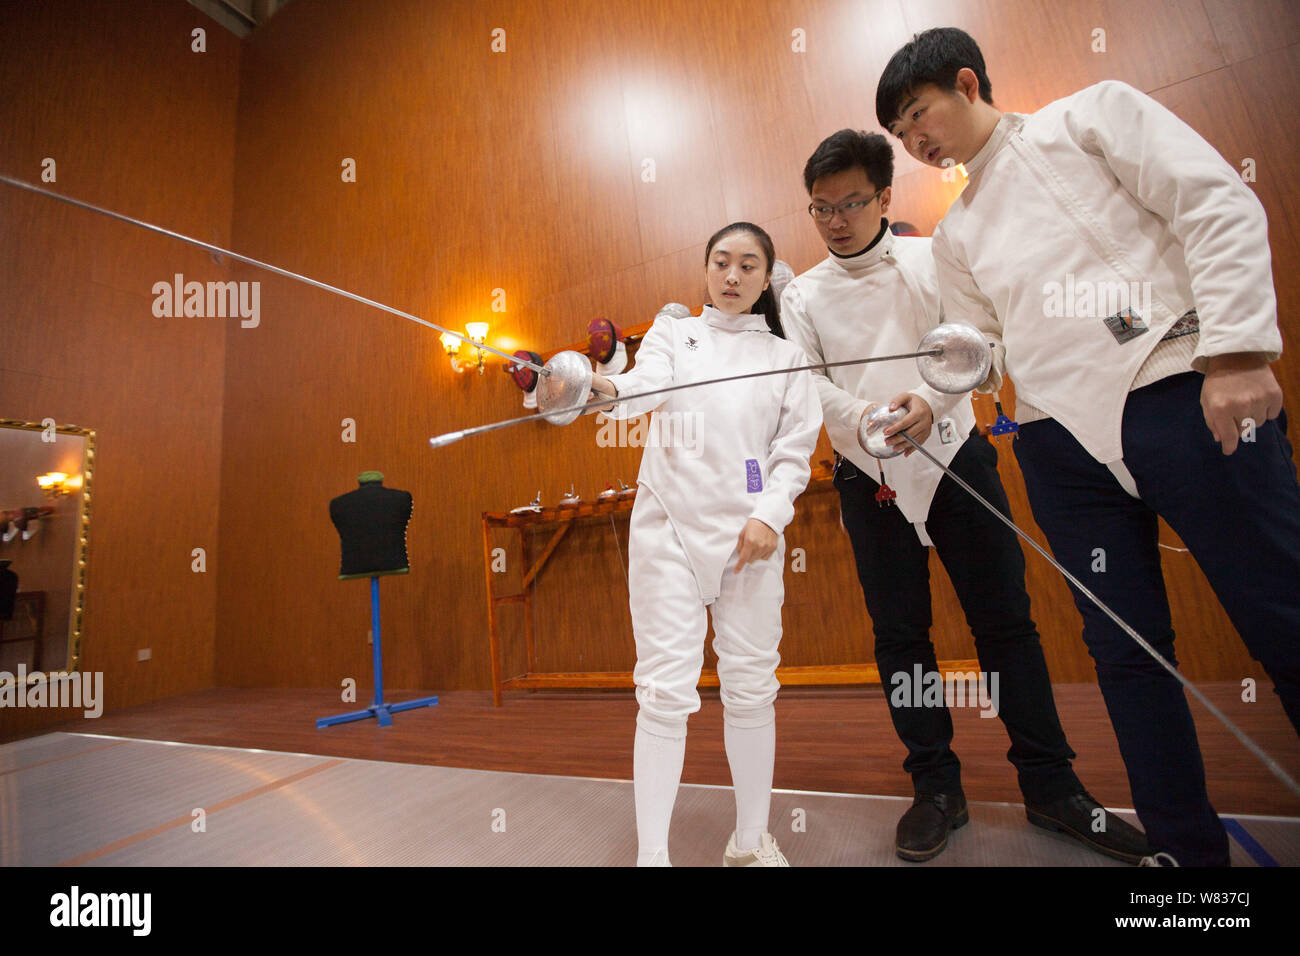 Chinese fencing trainer Mou Jiahui, left, instructs fencing skills to learners at her training center in Jilin city, northeast China's Jilin province, Stock Photo